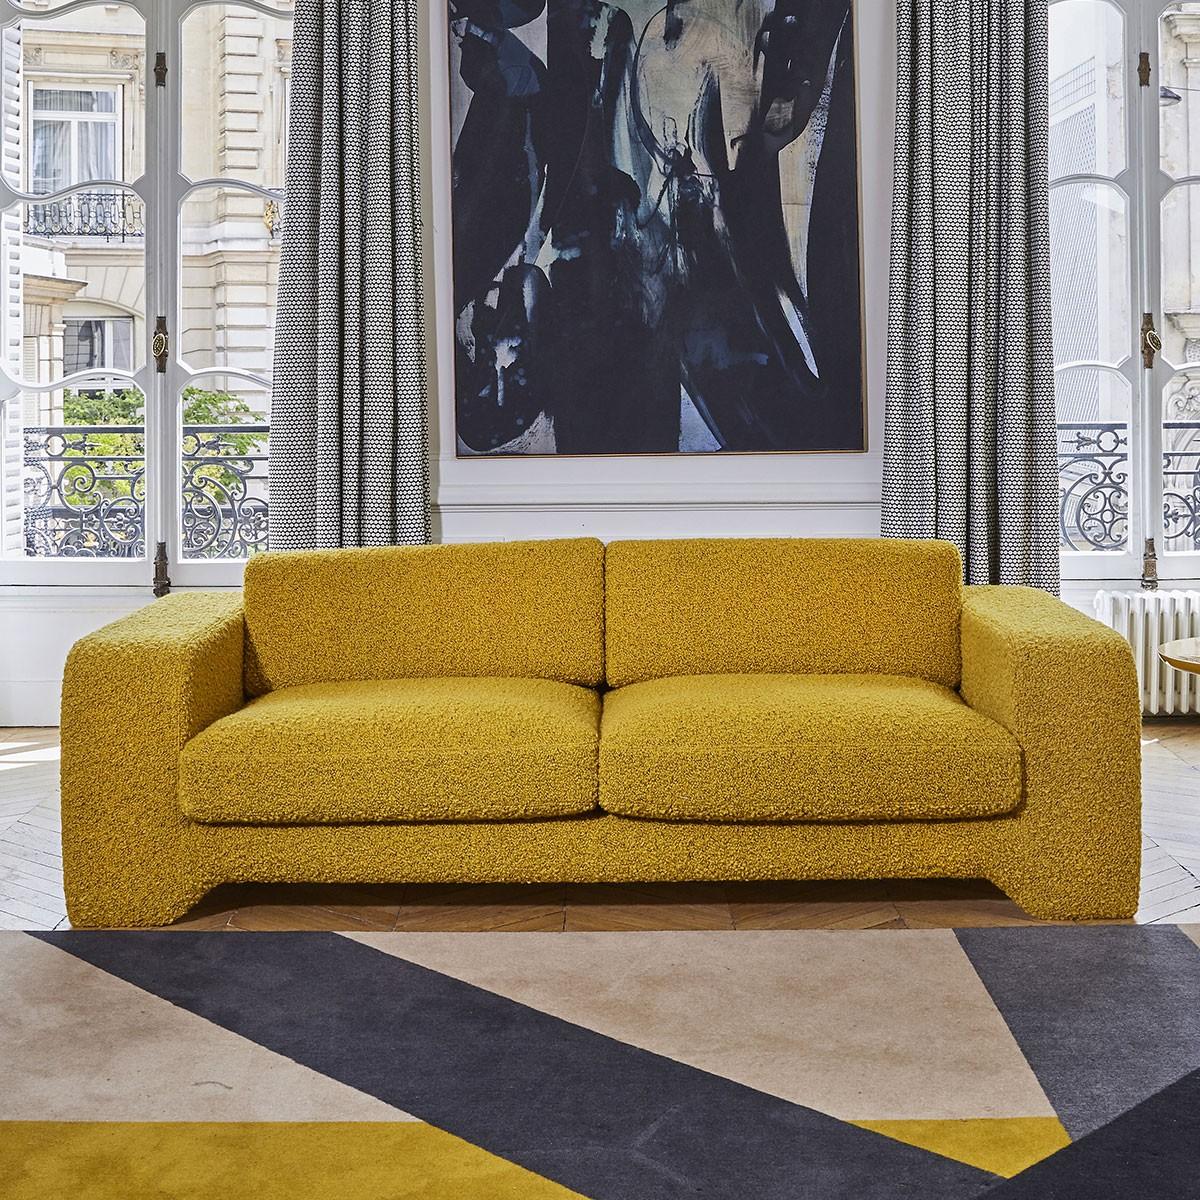 Popus Editions Giovanna 2.5 seater sofa in beige Verone velvet upholstery.

Giovanna is a sofa with a strong profile. A sober, plush line, with this famous detail that changes everything, so as not to forget its strength of character and this